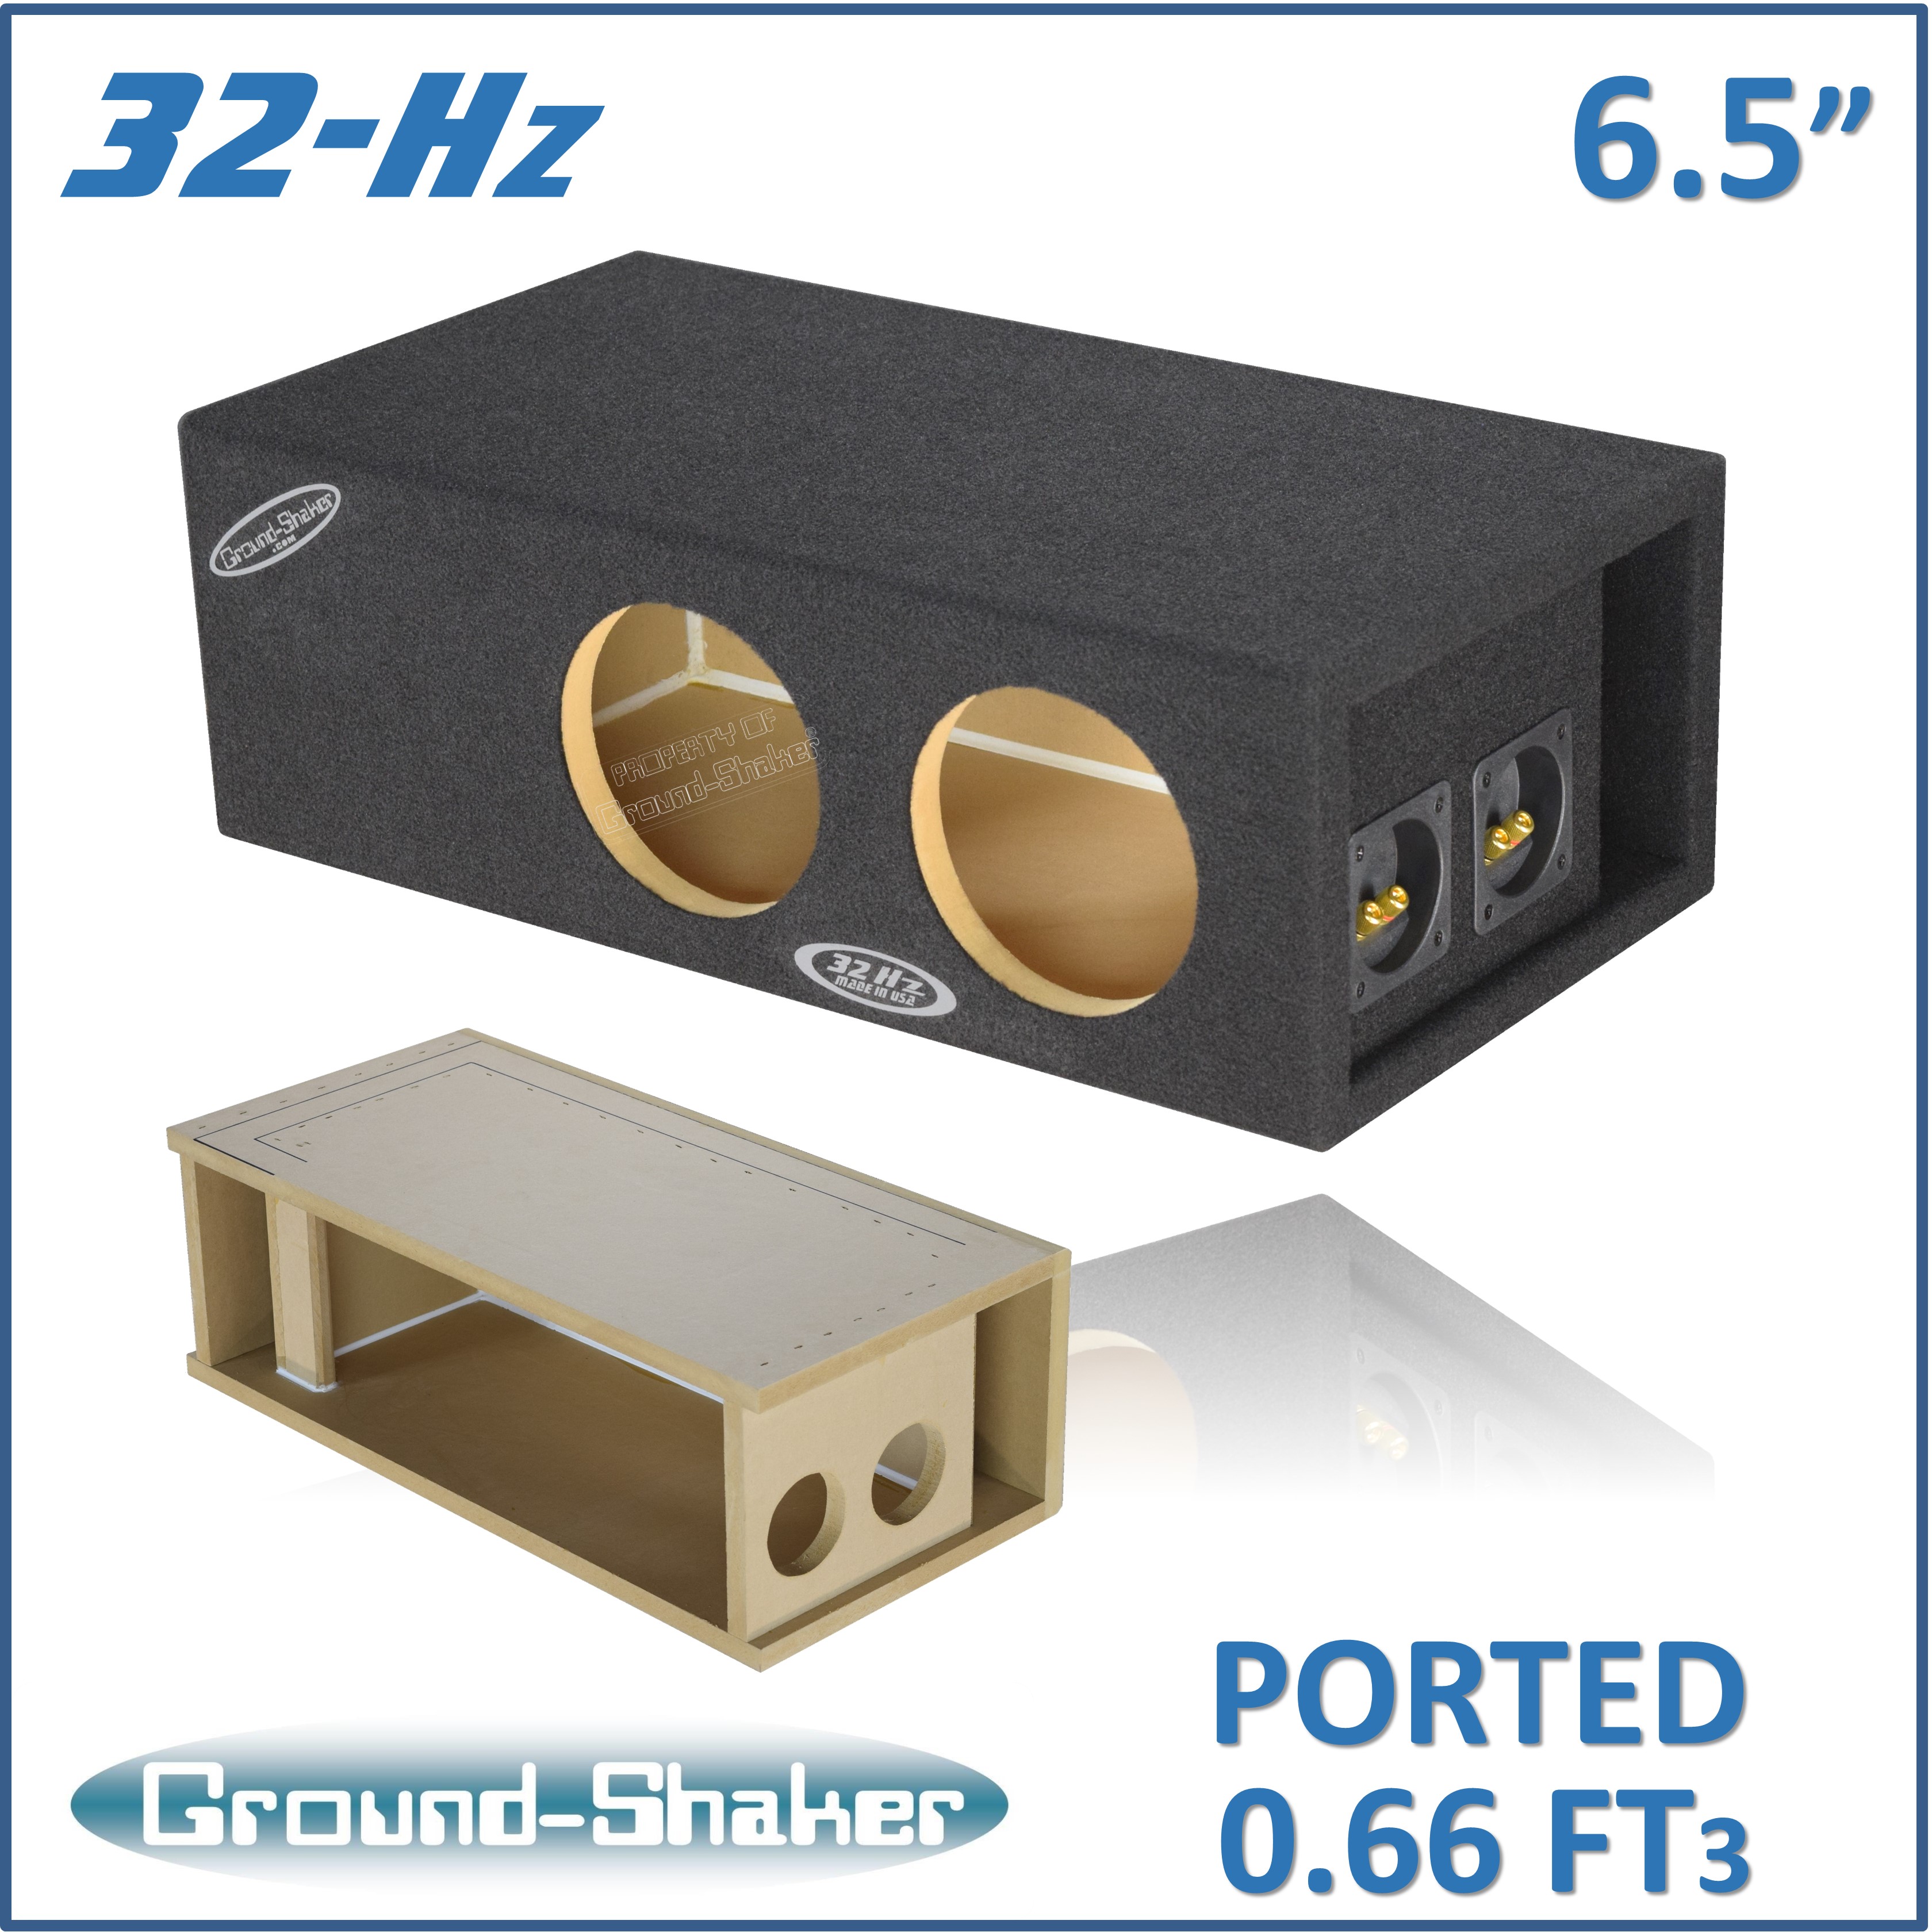 https://www.ground-shaker.com/images/products/32hz265b-1.jpg